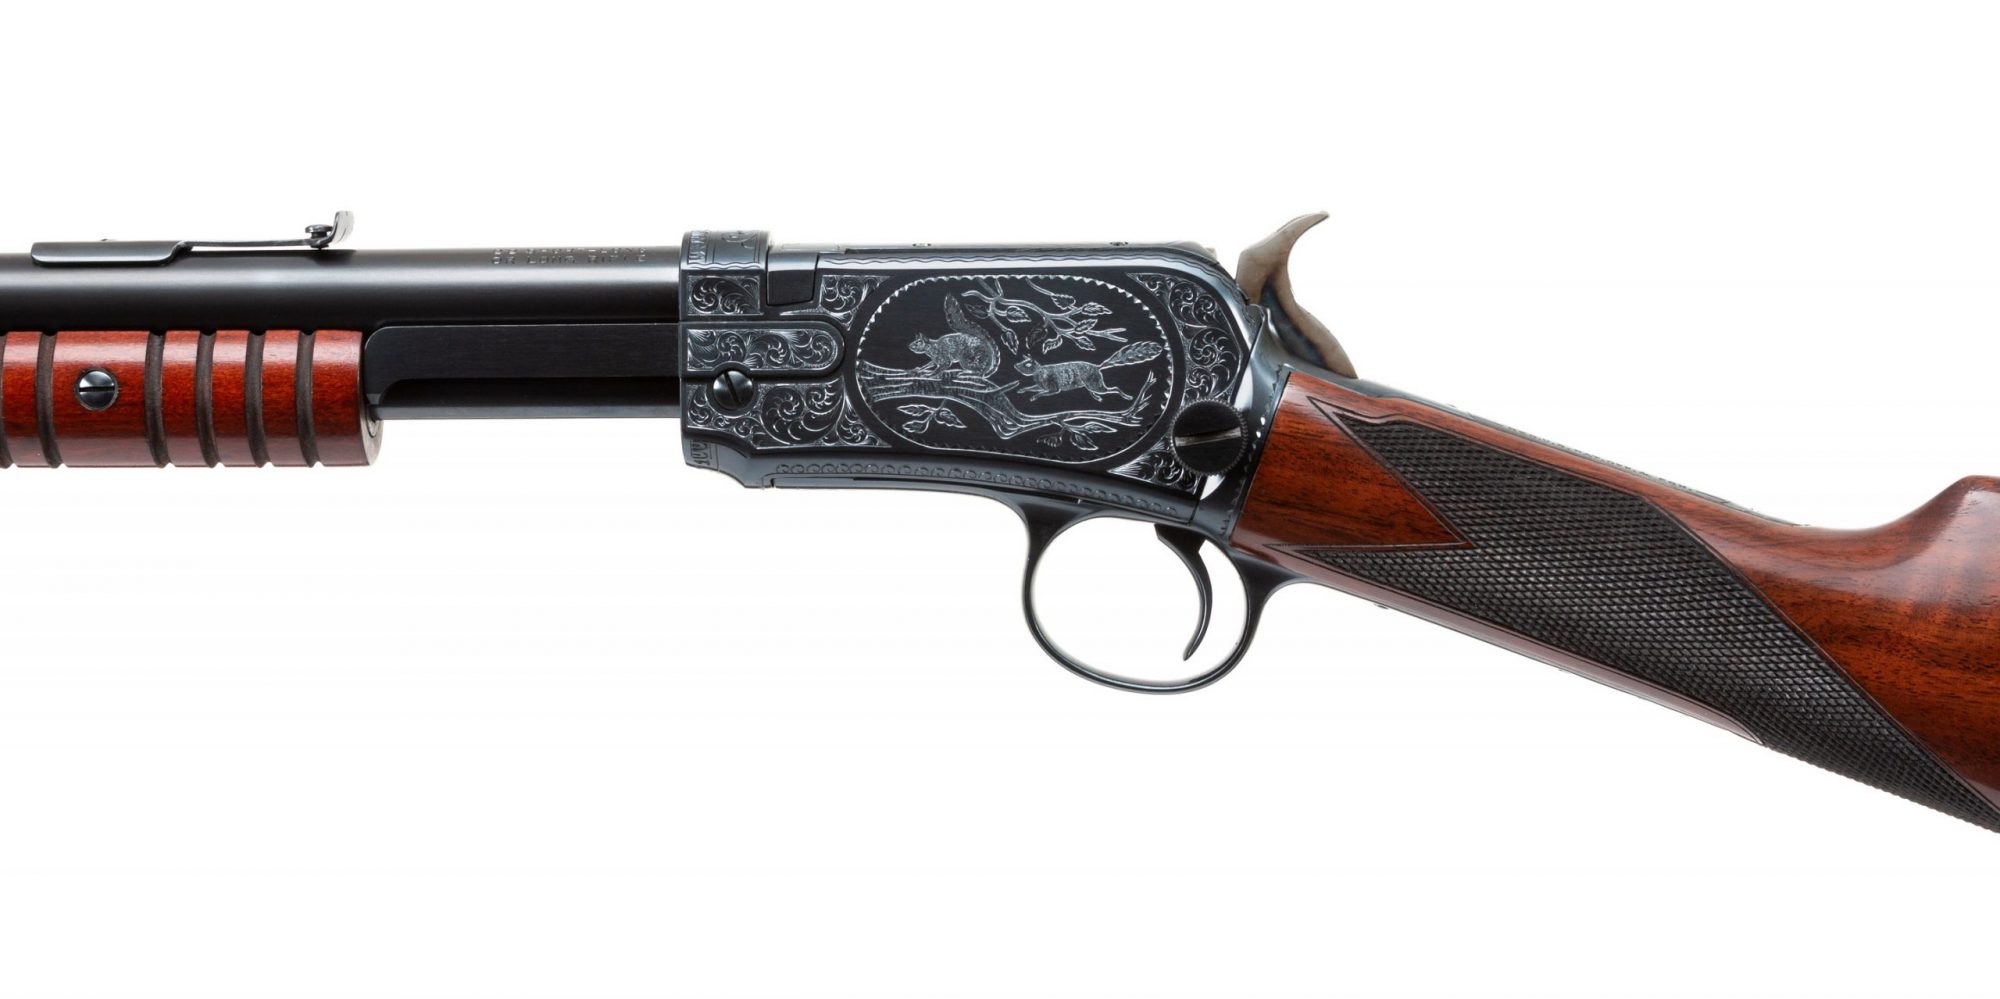 Photo of a restored engraved Winchester Model 1906 rifle by Turnbull Restoration of Bloomfield, NY